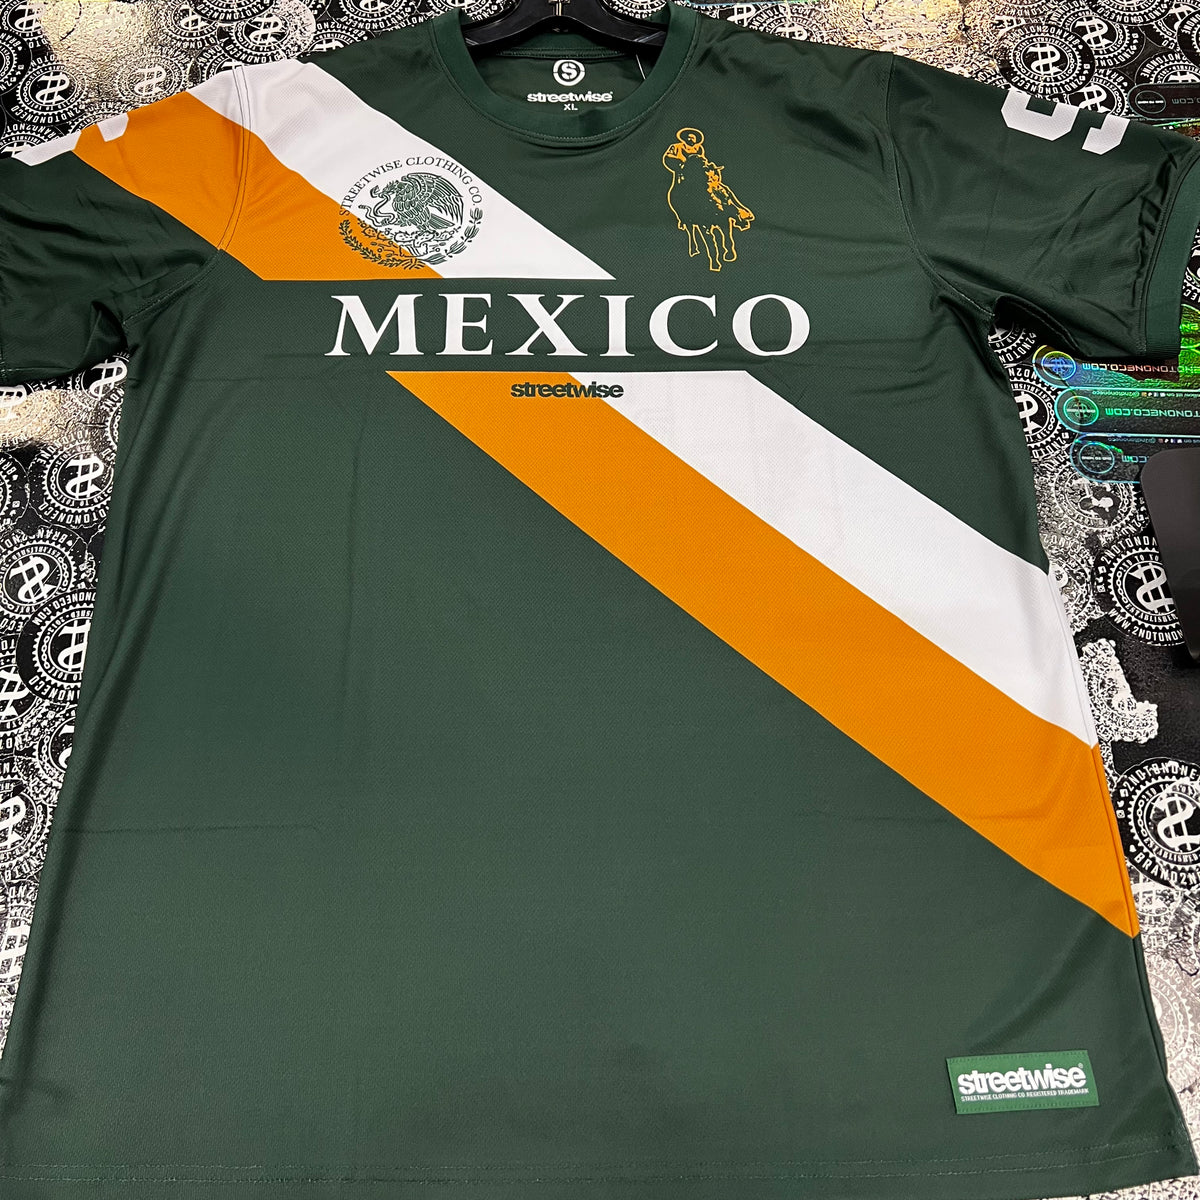 Streetwise Narco Polo Mexico soccer style Jersey in color Green